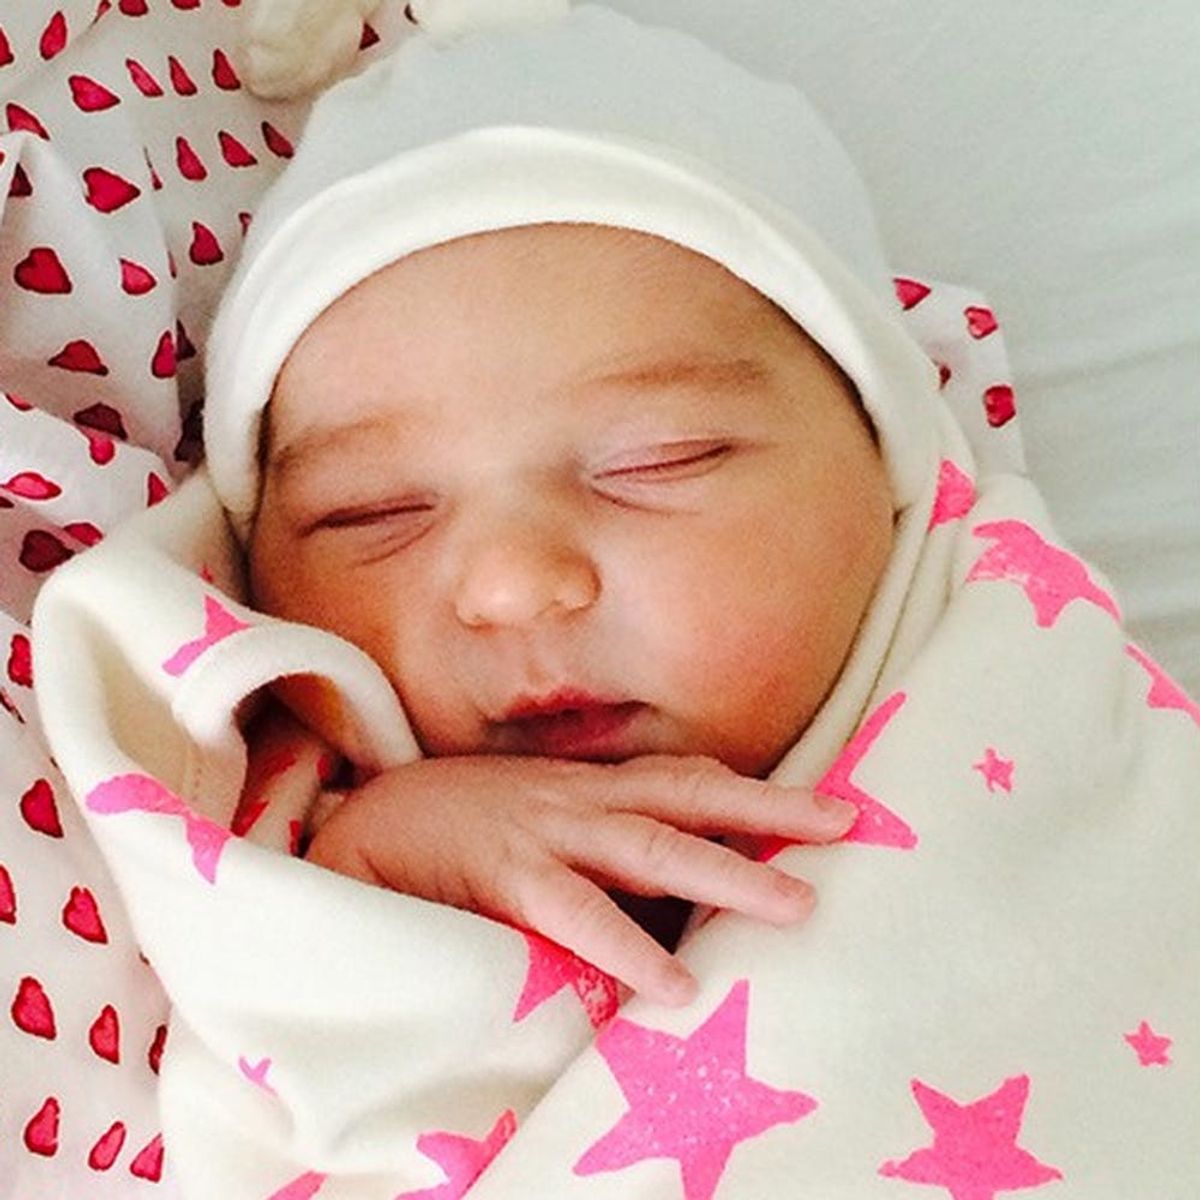 New Baby Names, First Photos + More of What’s Up This Week in Celebrity Baby News